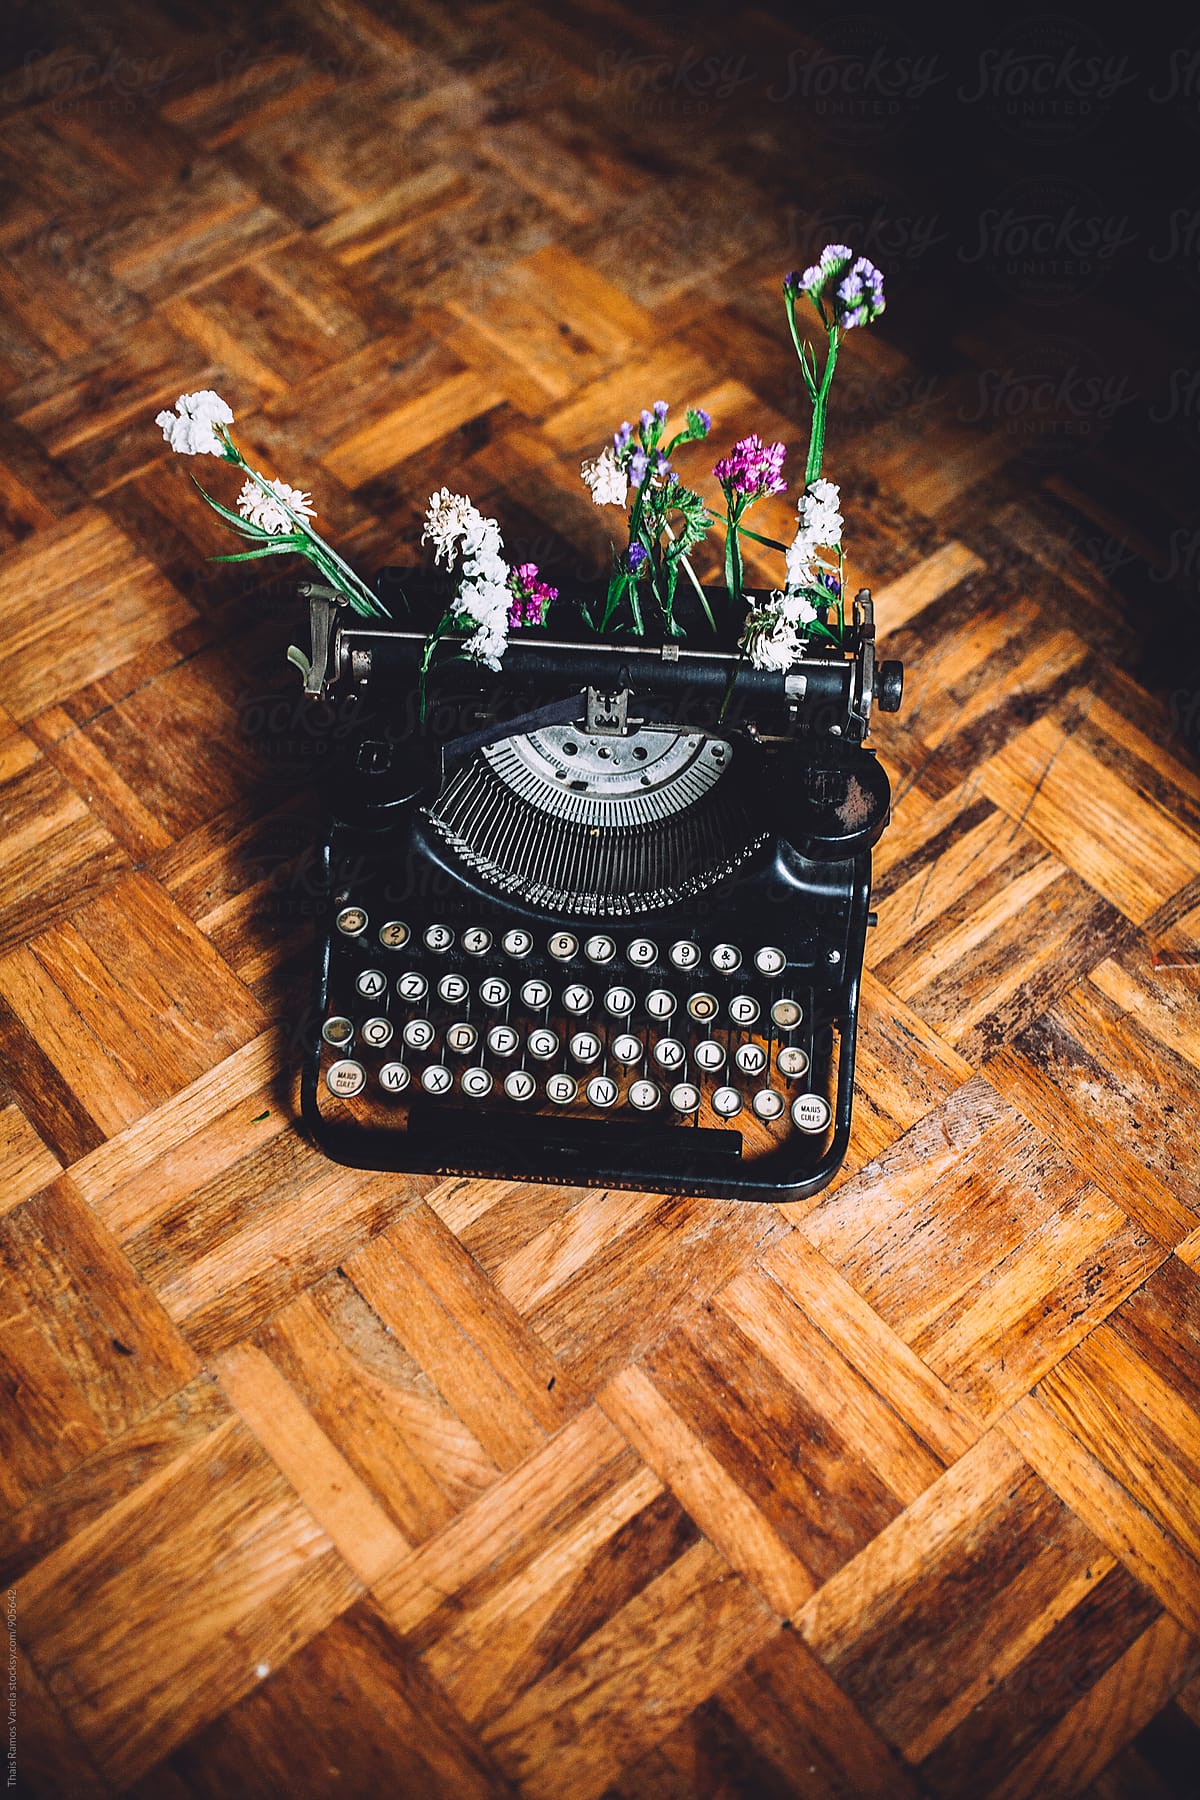 Typewriter with flowers